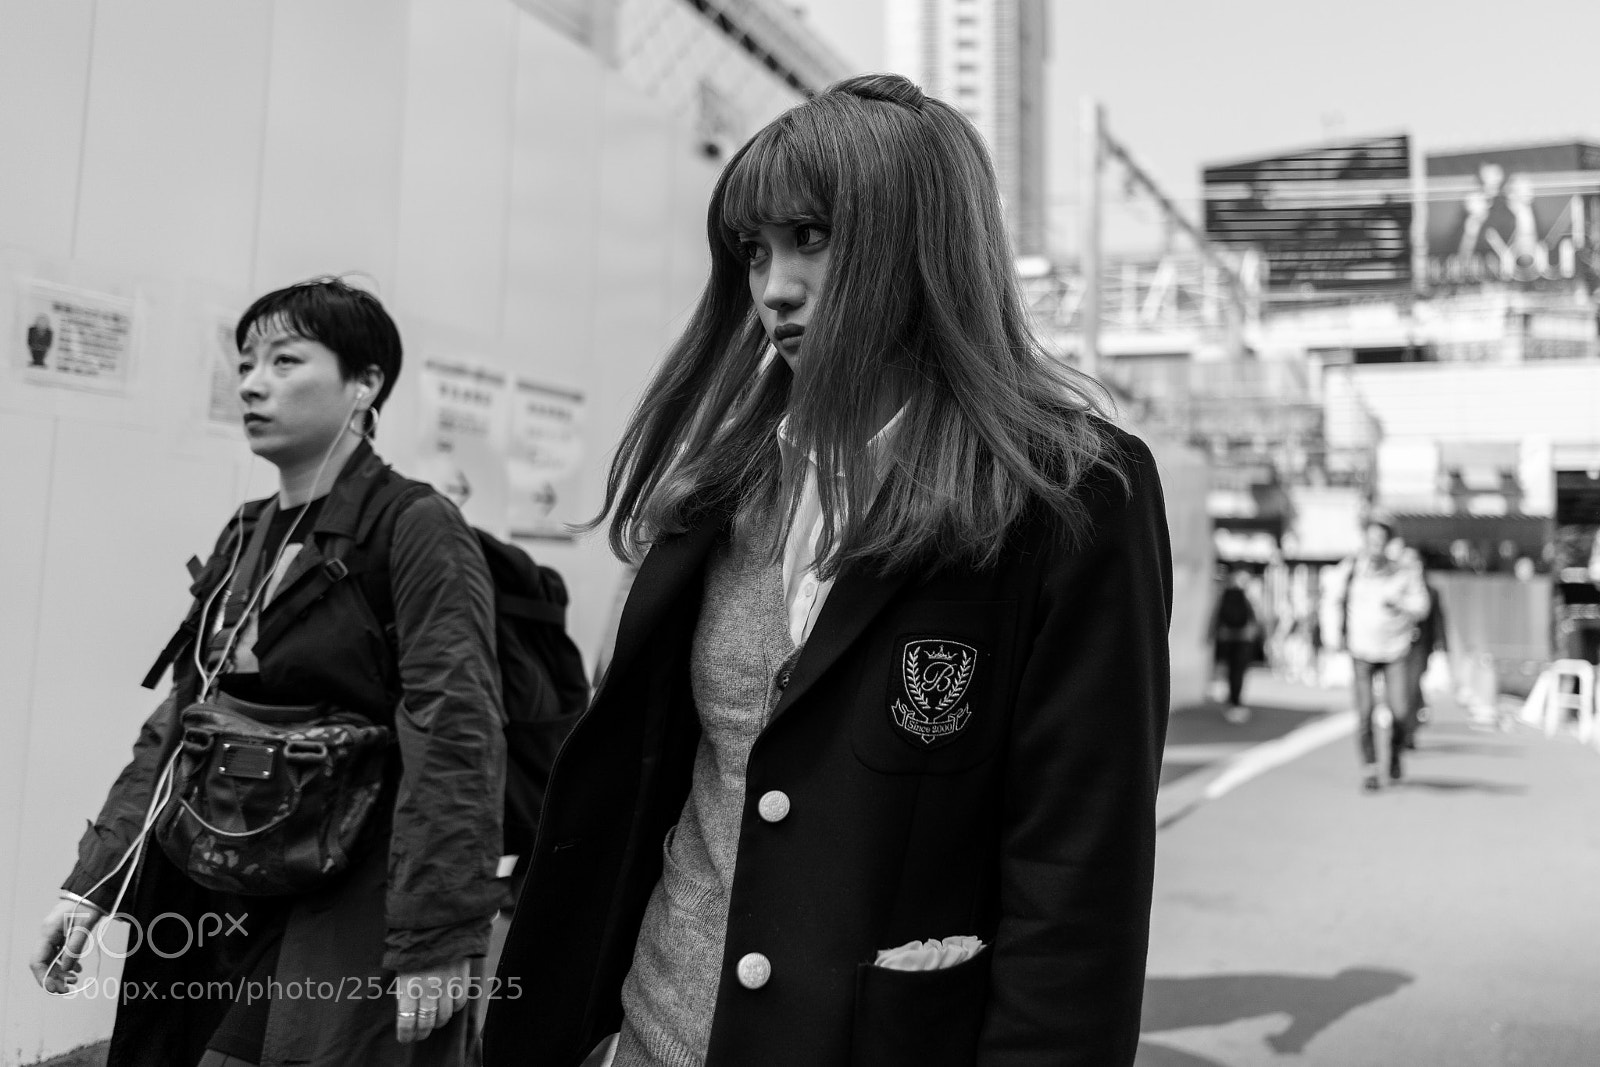 Sony a7 III sample photo. A girl in tokyo photography